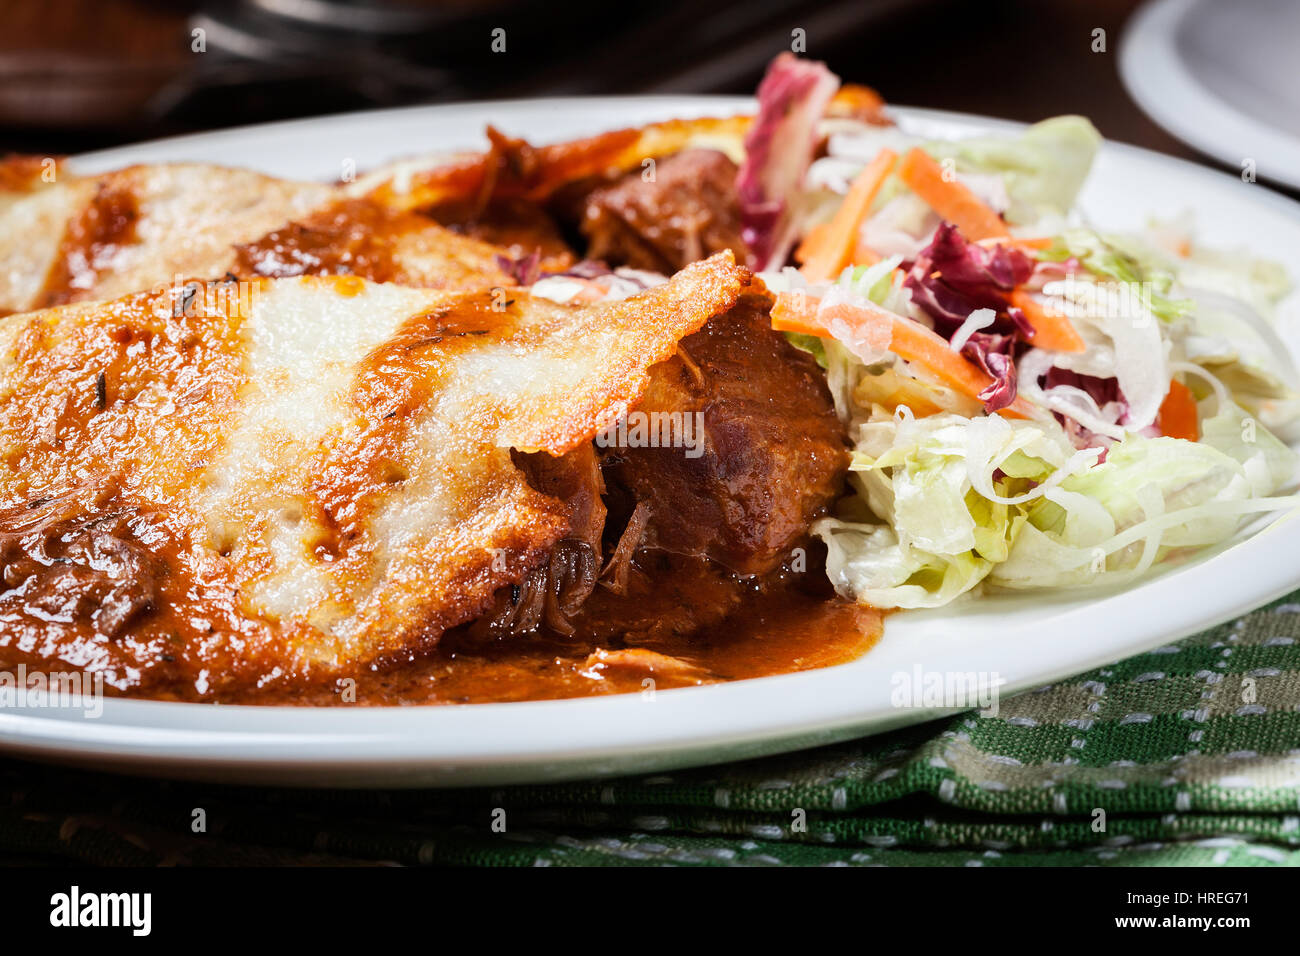 Potato pancakes with meat stew served on a plate Stock Photo